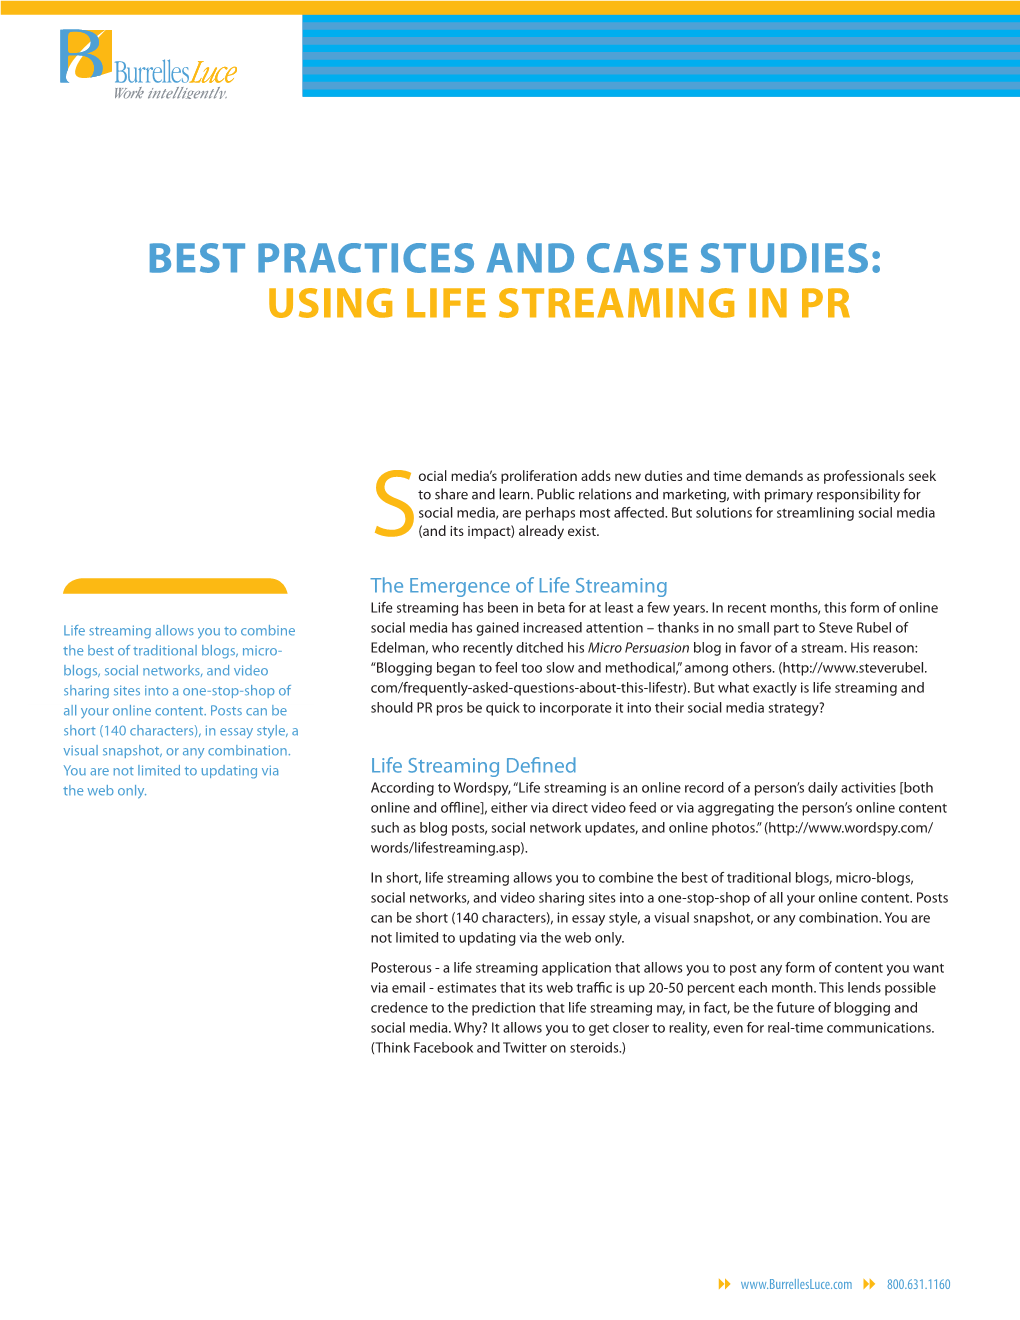 Best Practices and Case Studies: Using Life Streaming in PR